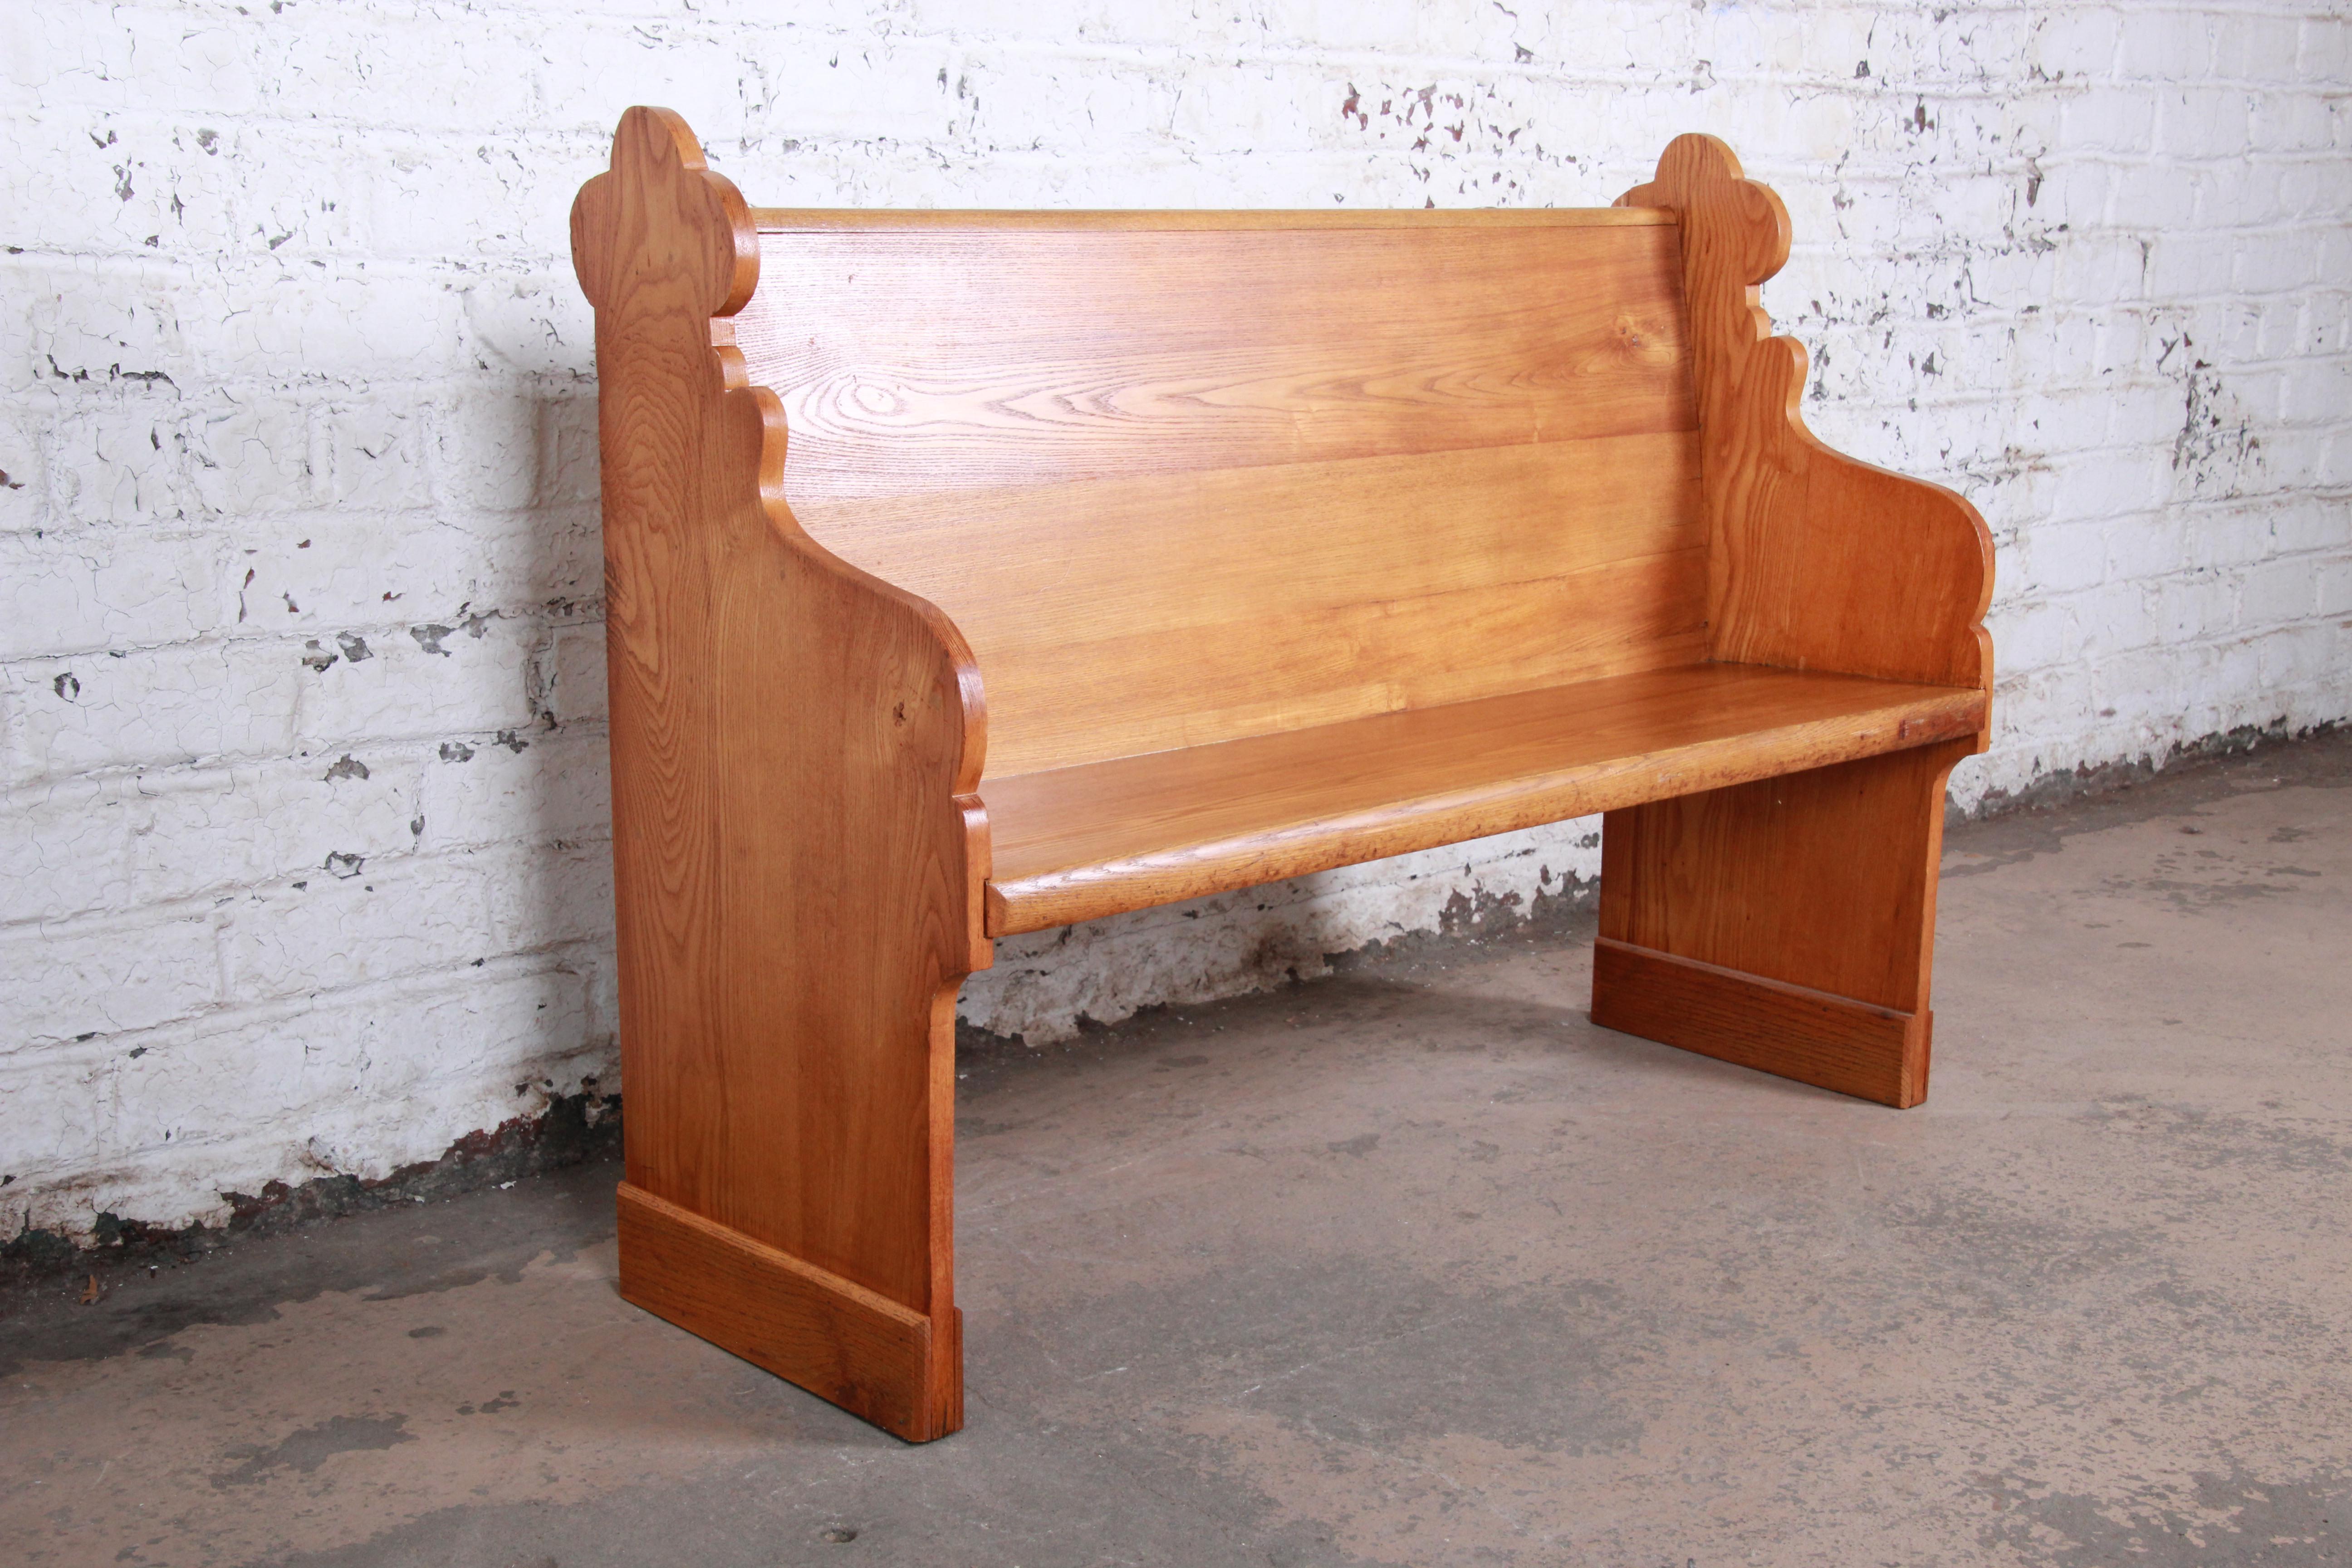 A gorgeous quartersawn oak Gothic Cathedral church pew or bench. It features beautiful wood grain and nice carved wood details. Would make an excellent entry bench. There is a unique Celtic medallion on the top of the seat back. The bench is solid